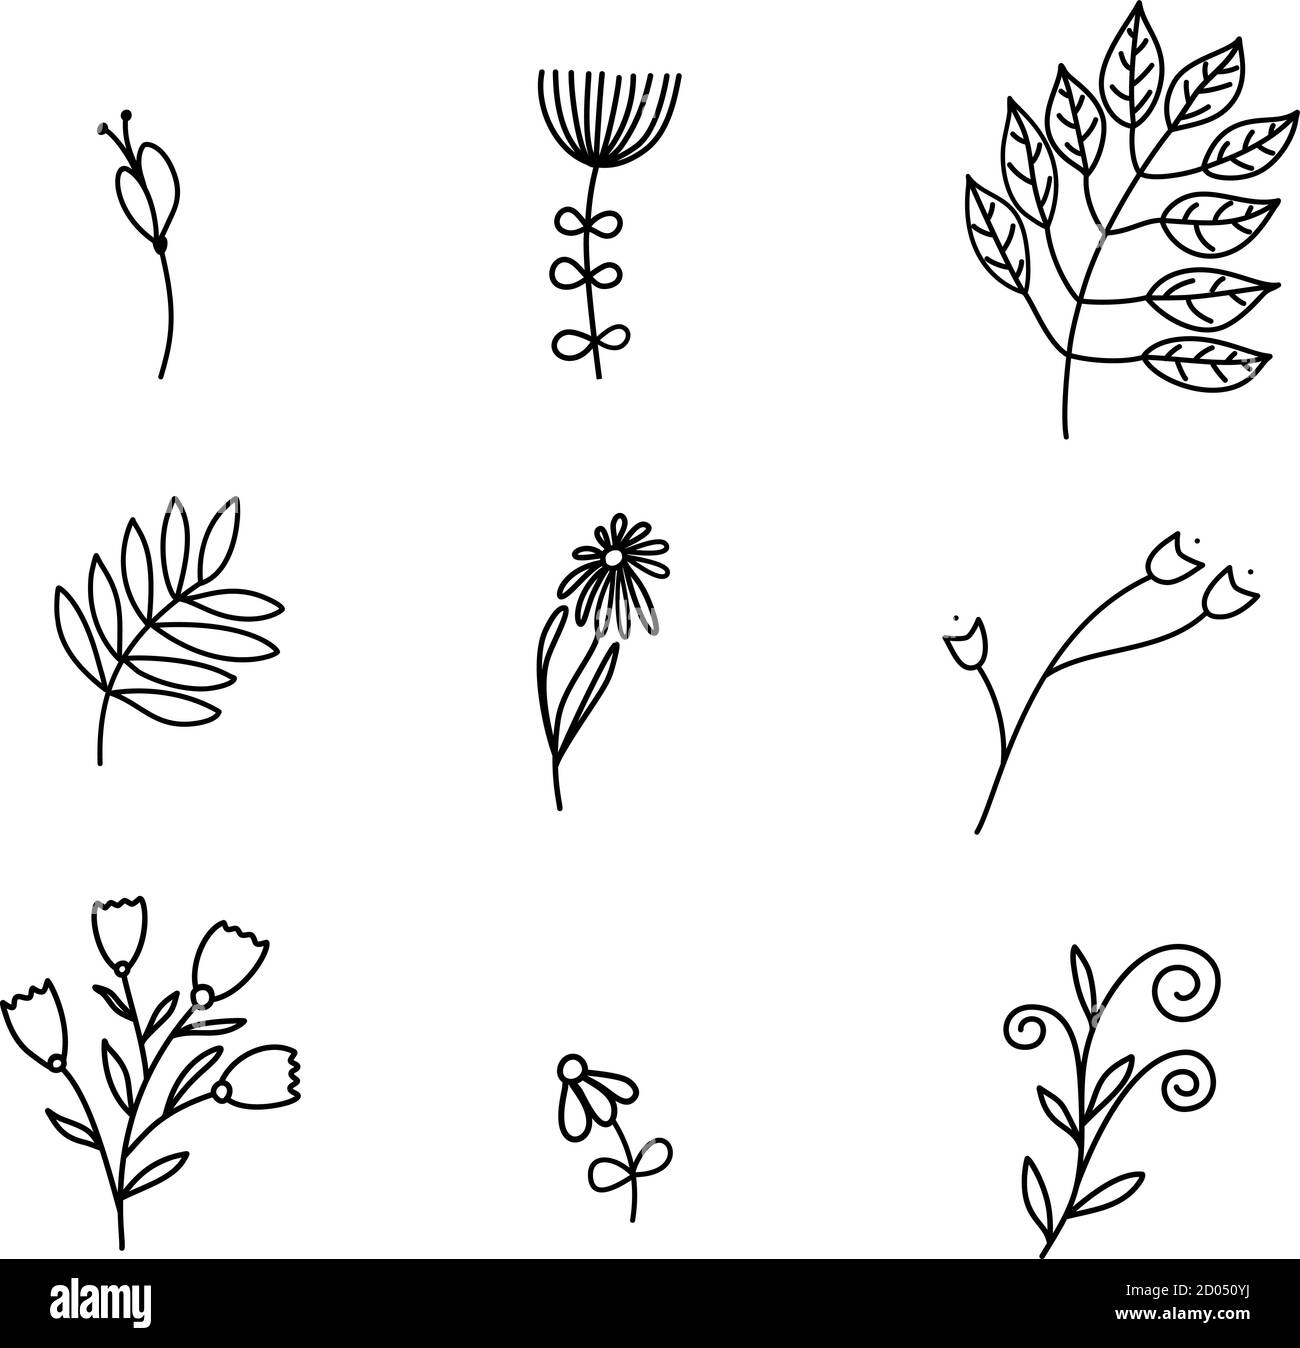 Set of vector sketches and line doodles logo. Hand drawn design elements isolated flowers, leaves, herbs for decoration prints, labels, patterns Stock Vector